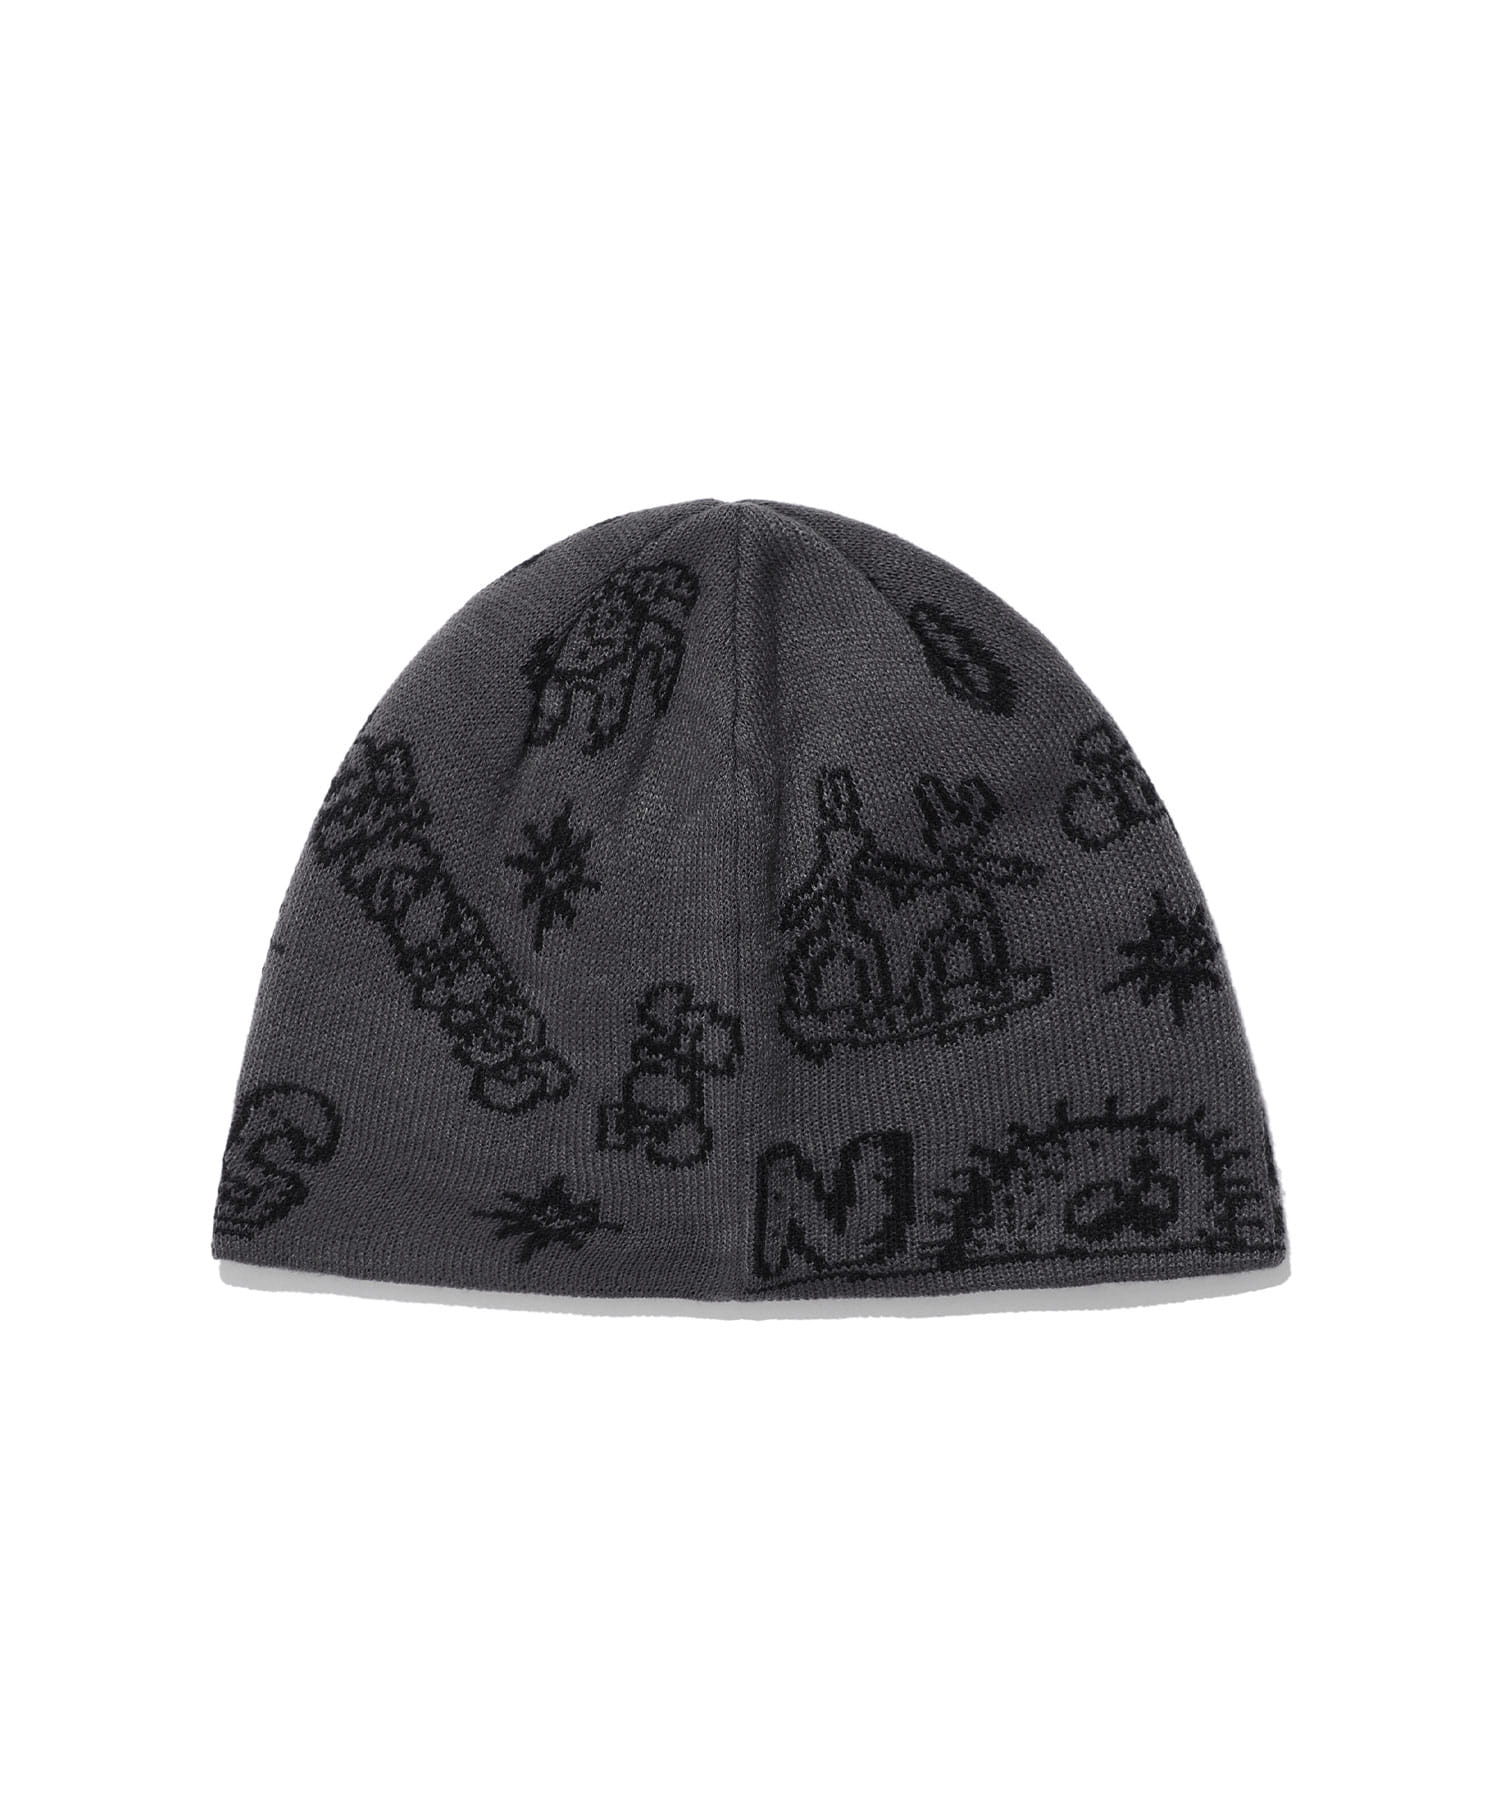 DOODLE BEANIE[CHARCOAL]